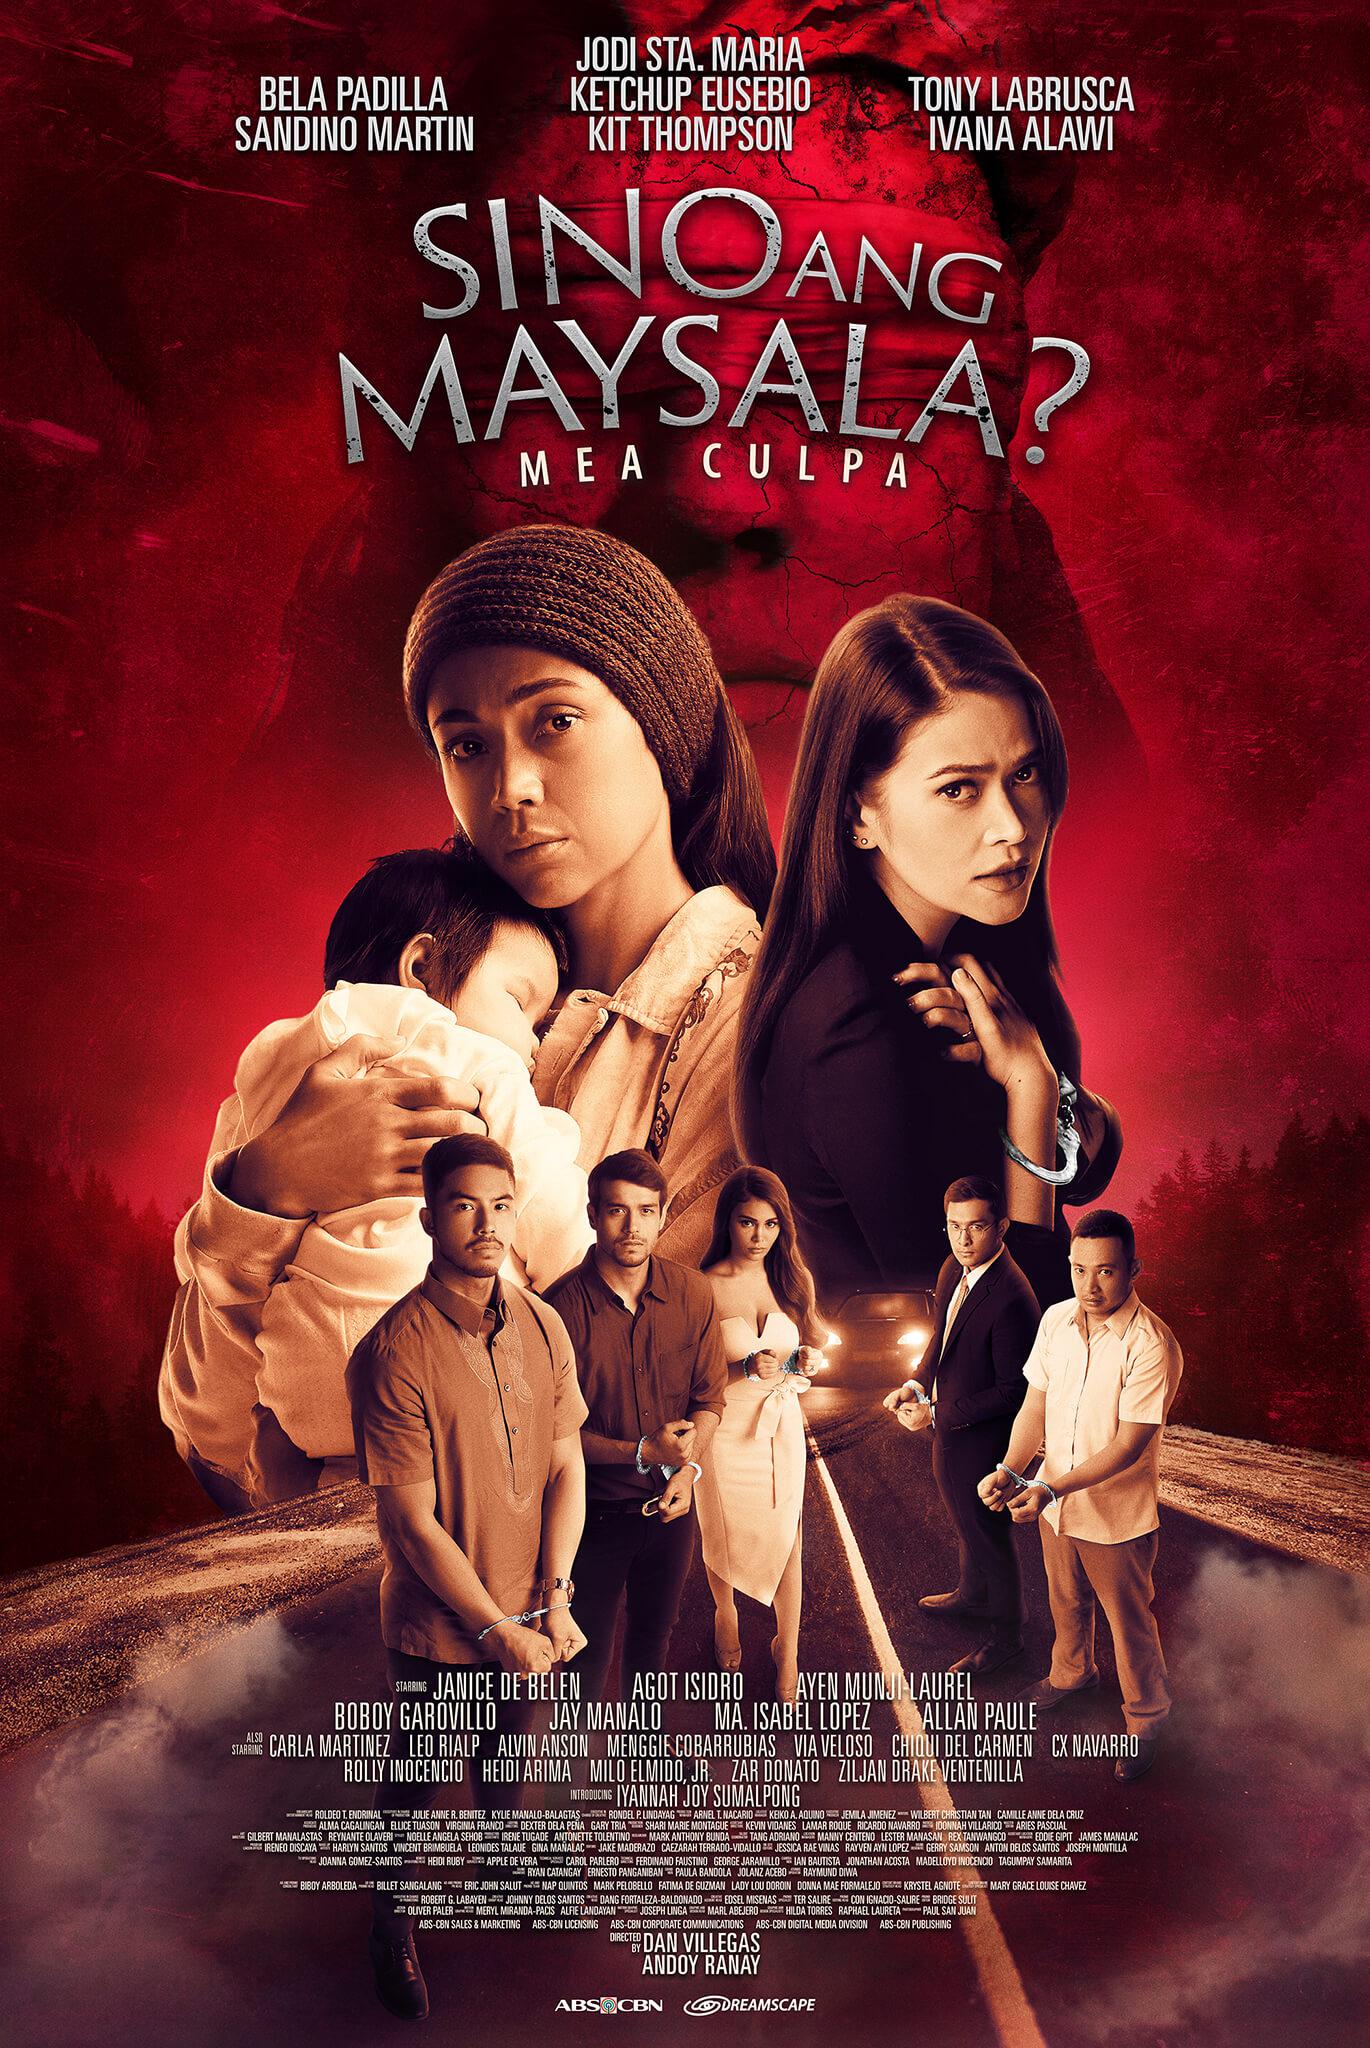 TV ratings for SINO ANG MAYSALA?Mea Culpa in Portugal. ABS-CBN TV series